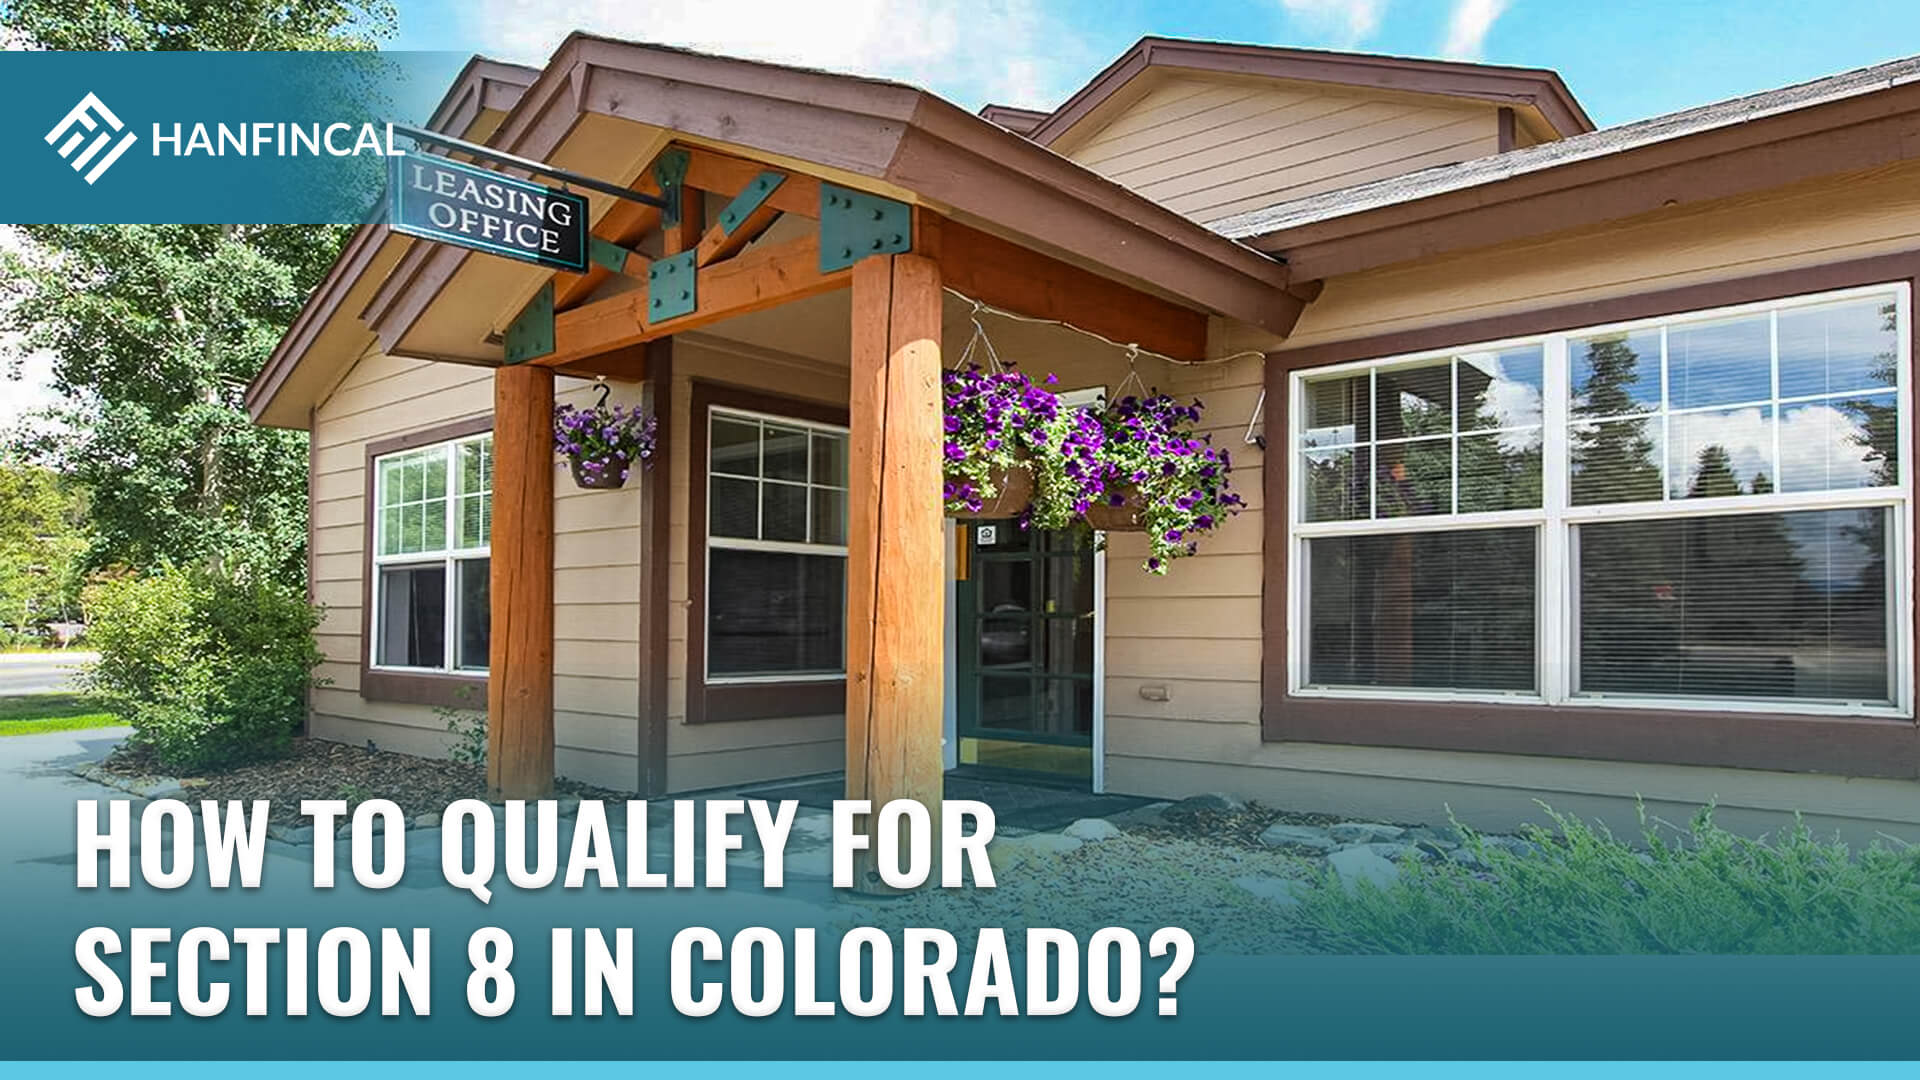 How to qualify for Section 8 in Colorado?